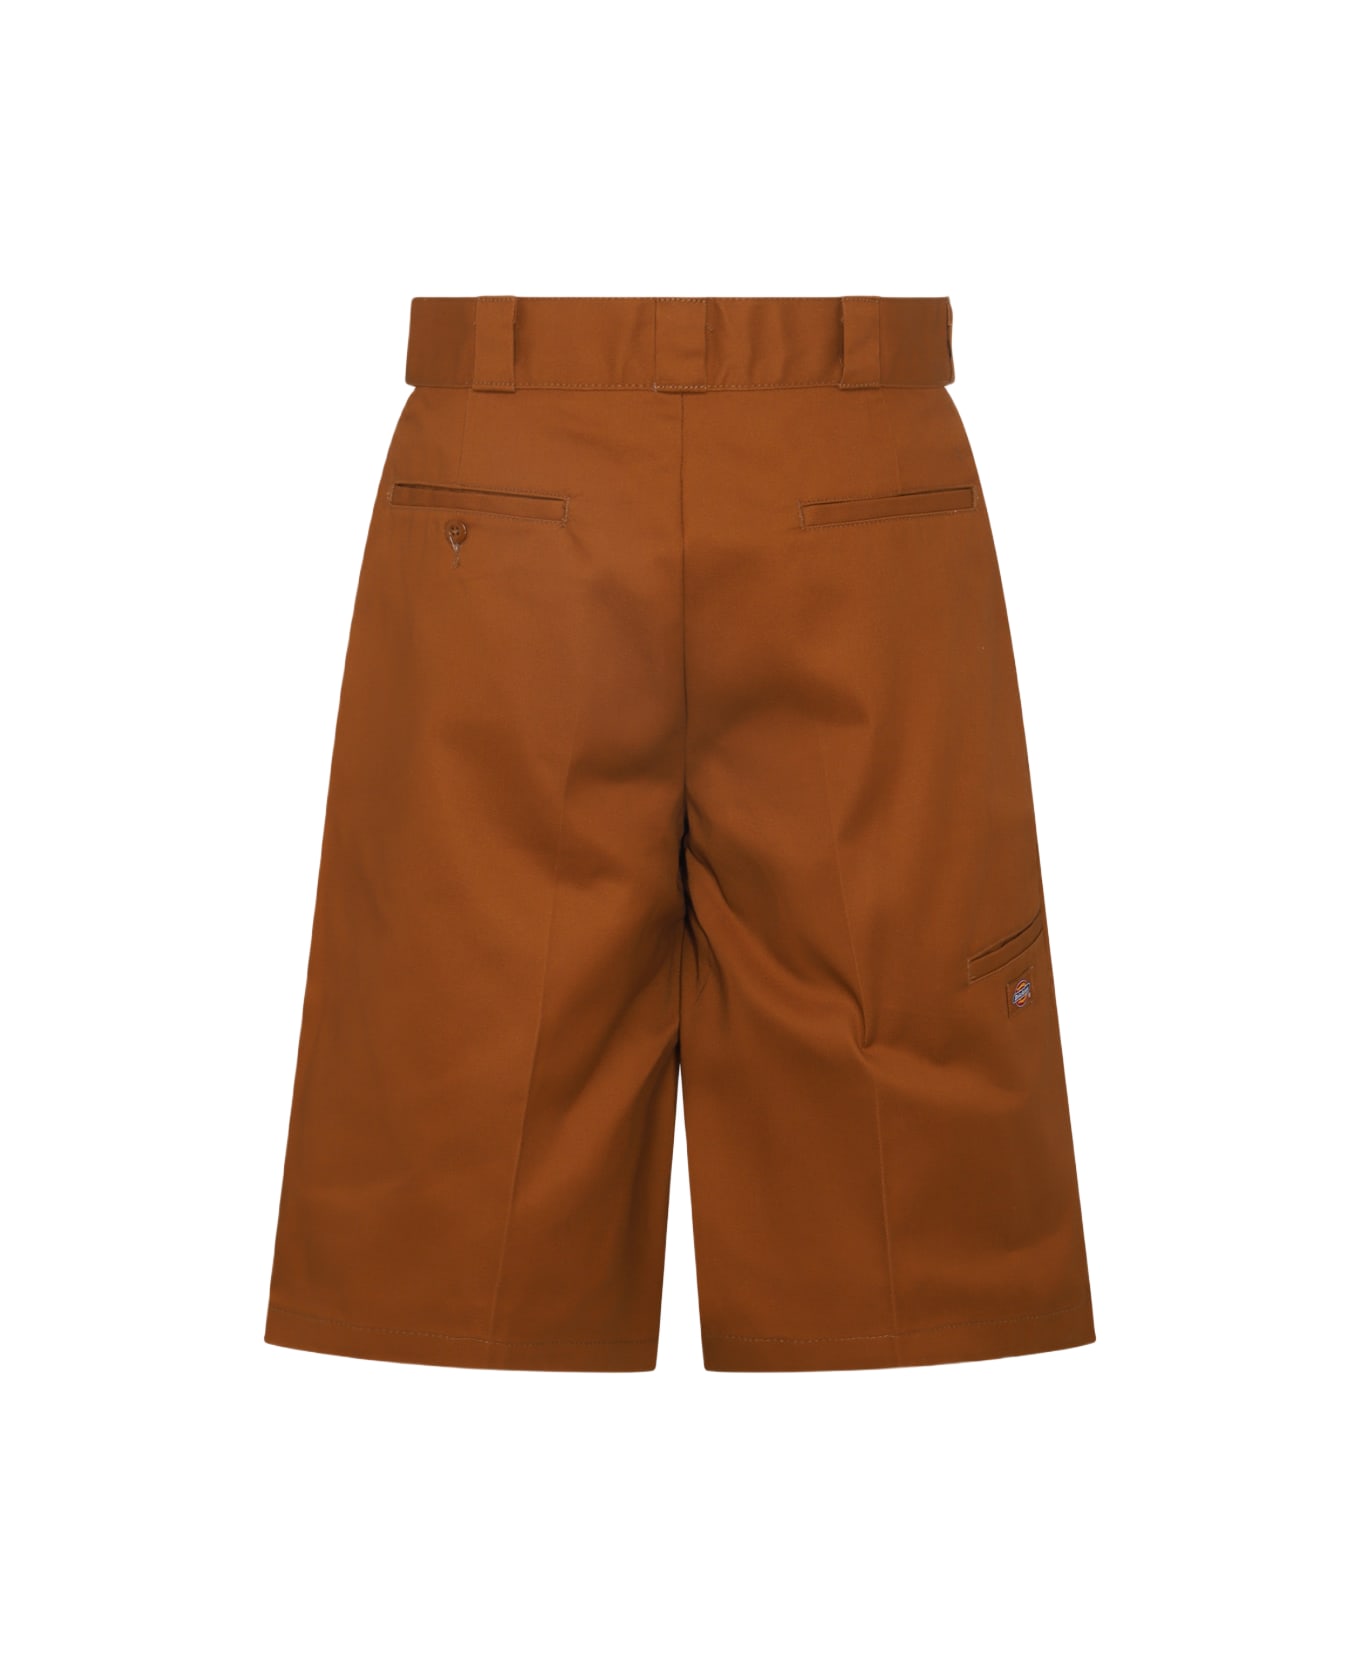 Dickies Brown Cotton Blend Shorts